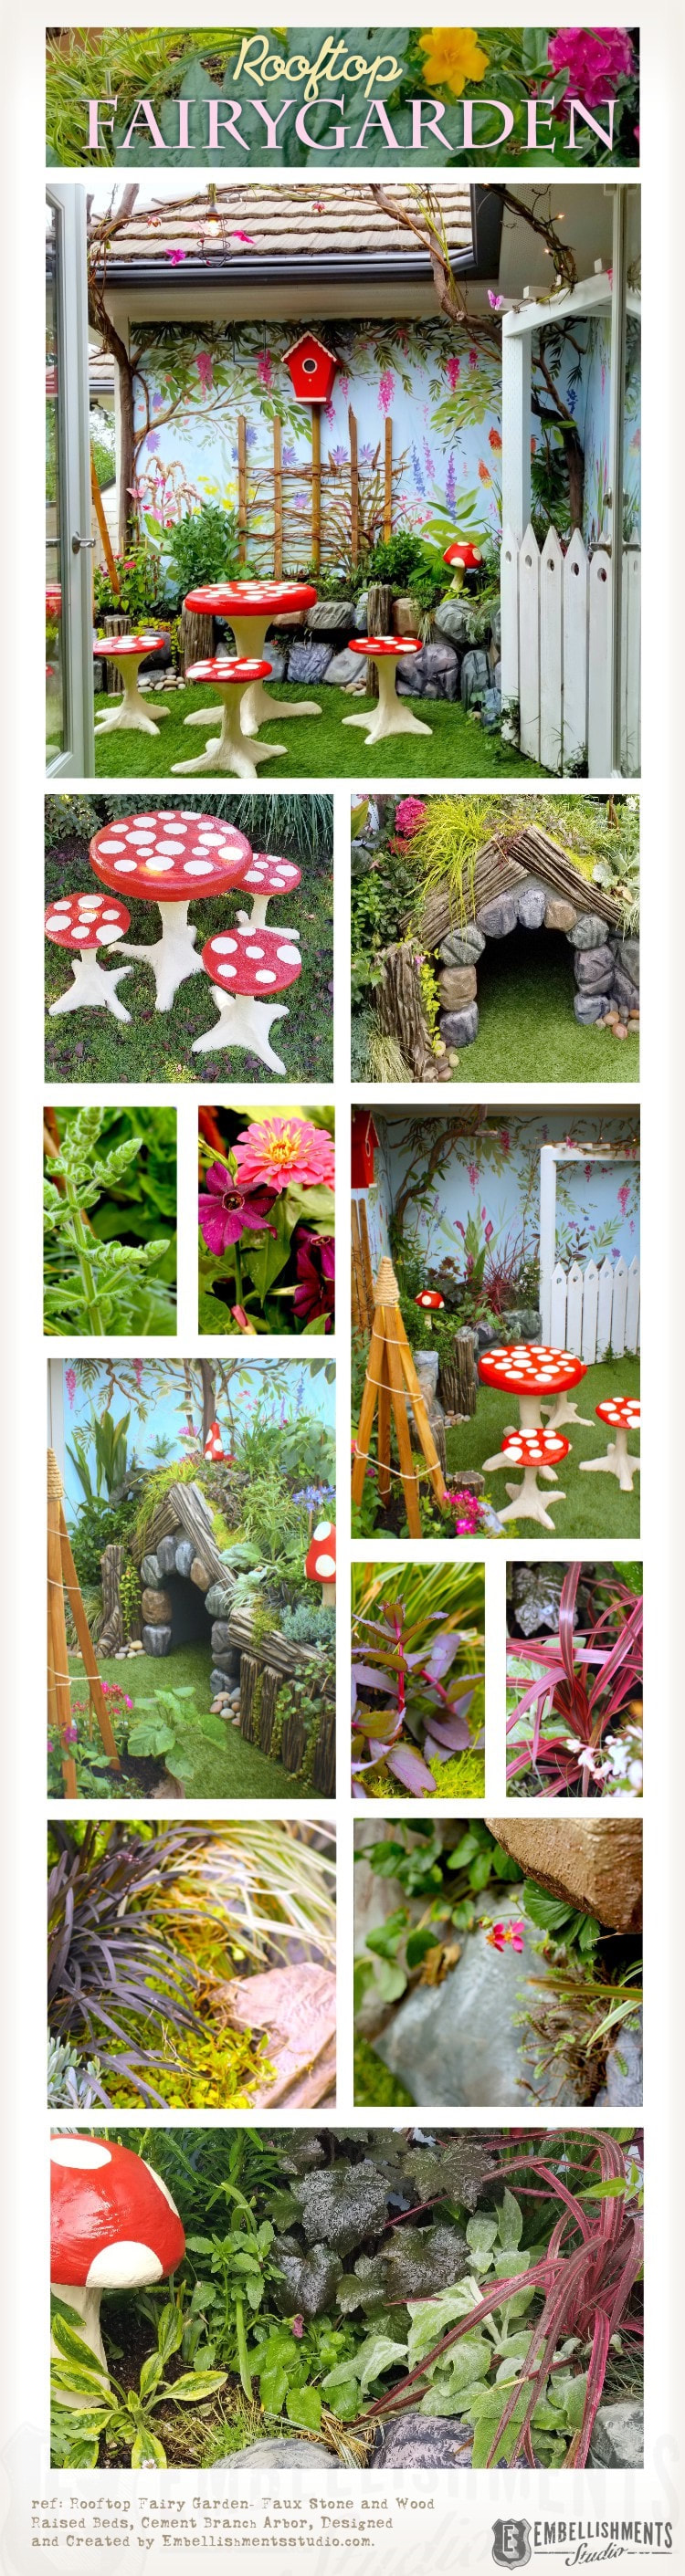 Rooftop Fairy Garden for Kids designed with Mushroom furniture, hobbit-hole doghouse and plenty of fairy and fauna luring plants.